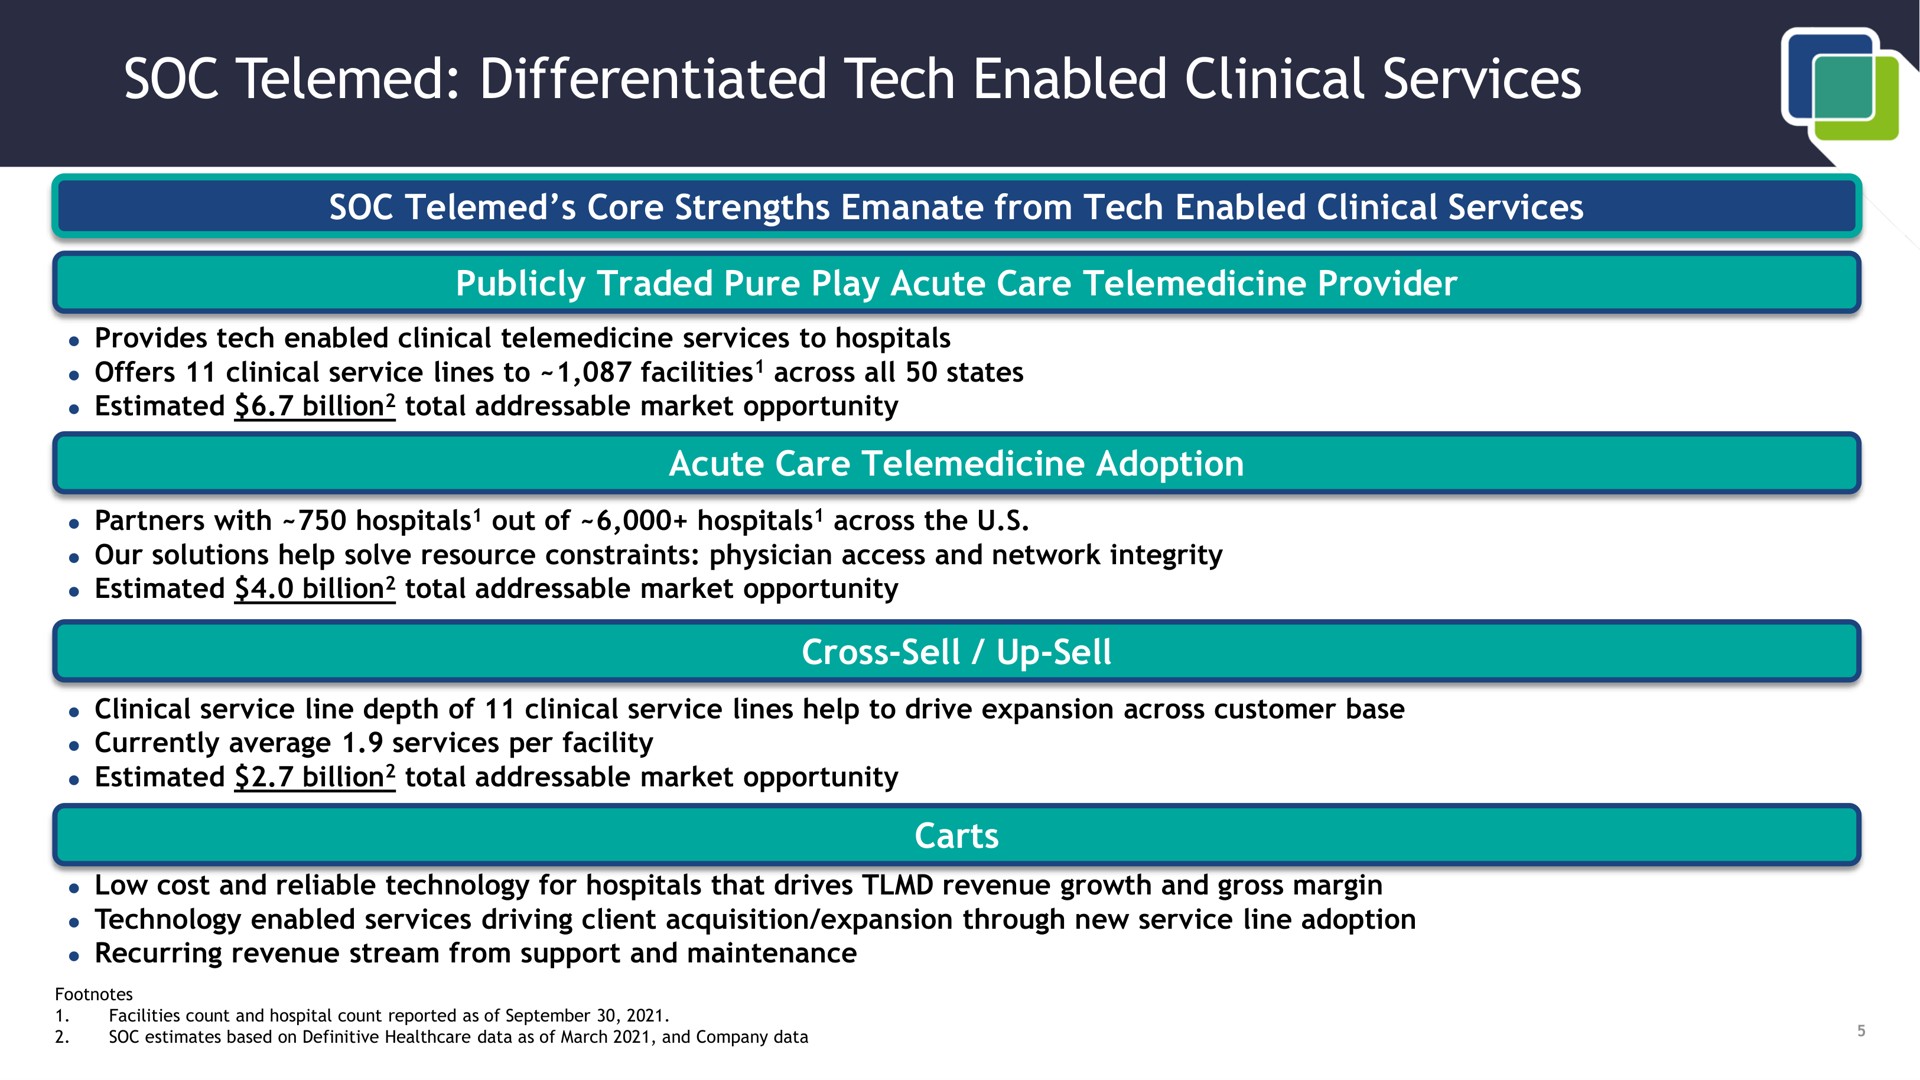 soc differentiated tech enabled clinical services | SOC Telemed